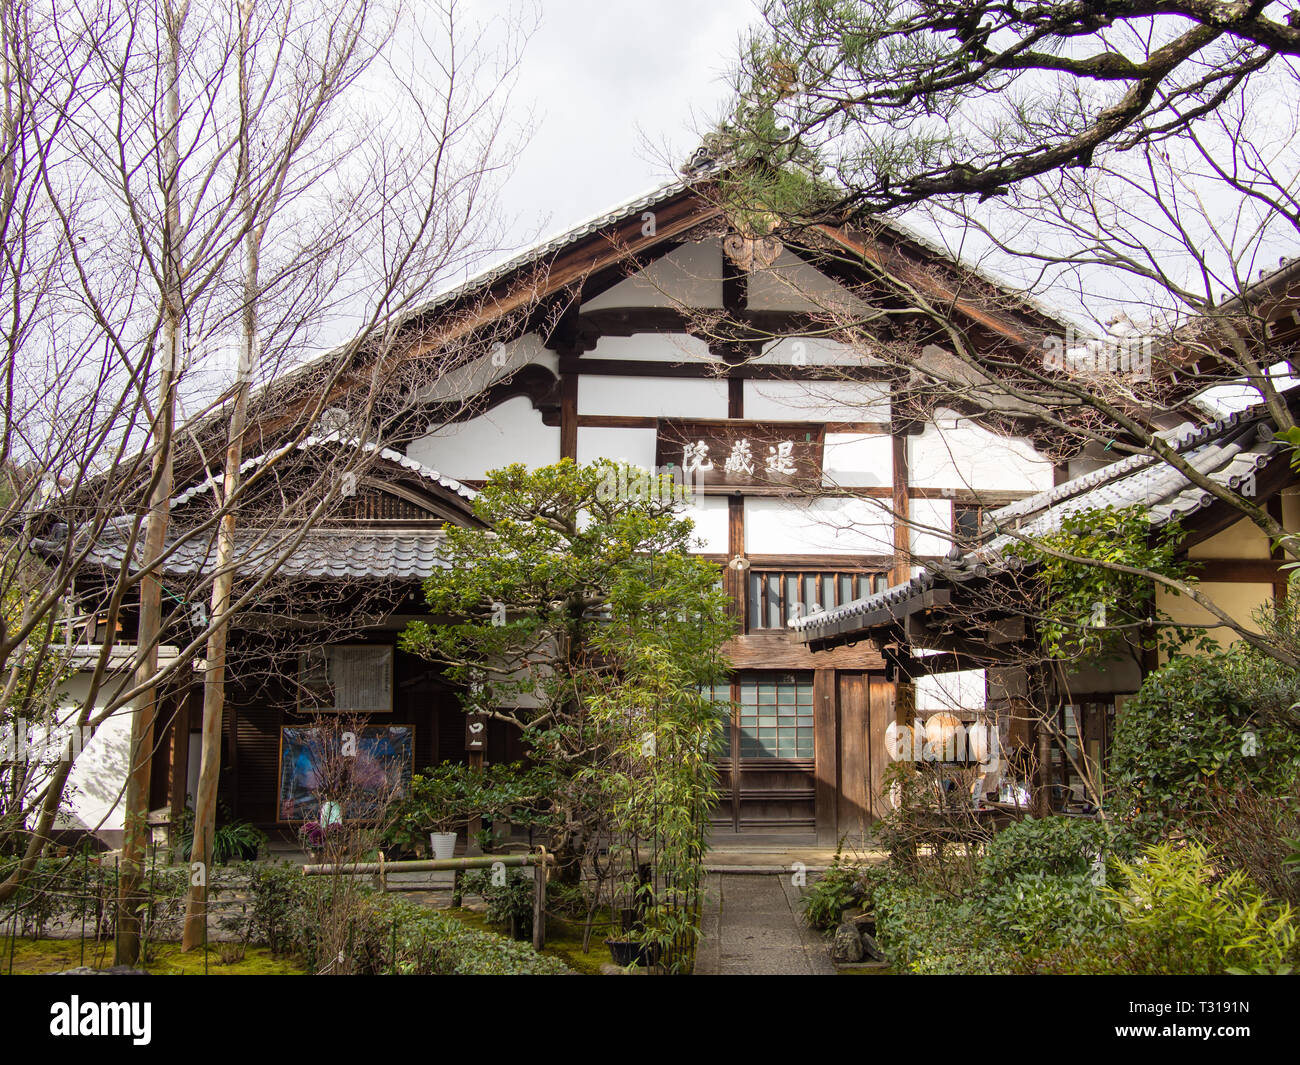 The main building of Taizo-in, the oldest sub-temple of Myoshinji Temple in Kyoto, Japan. Stock Photo